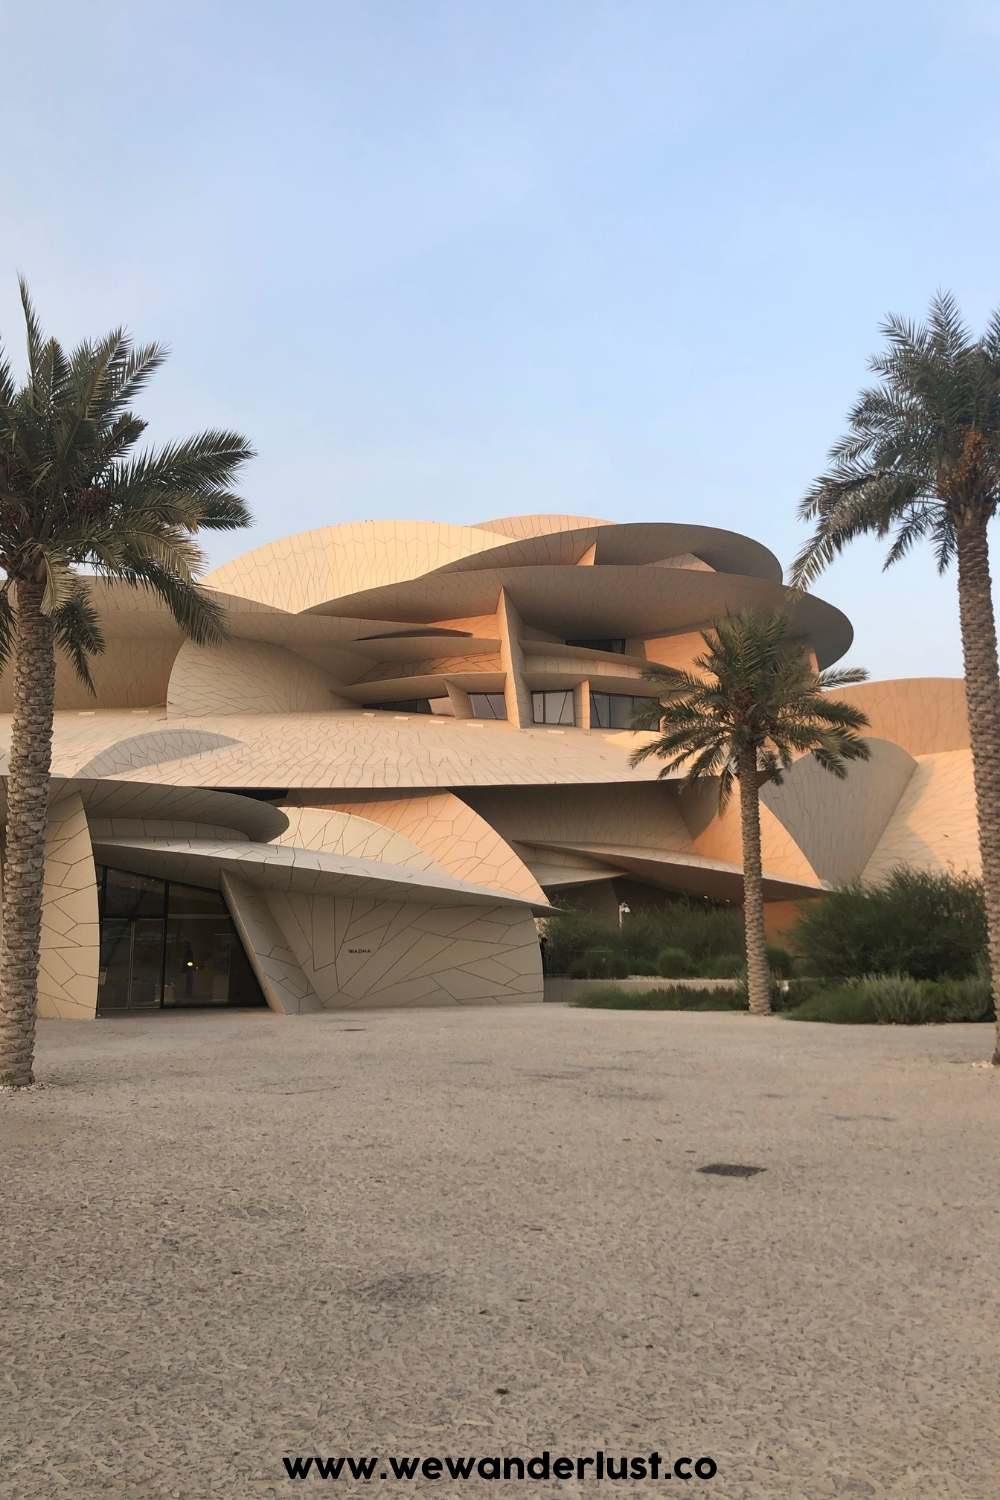 outside view of museum in doha, qatar